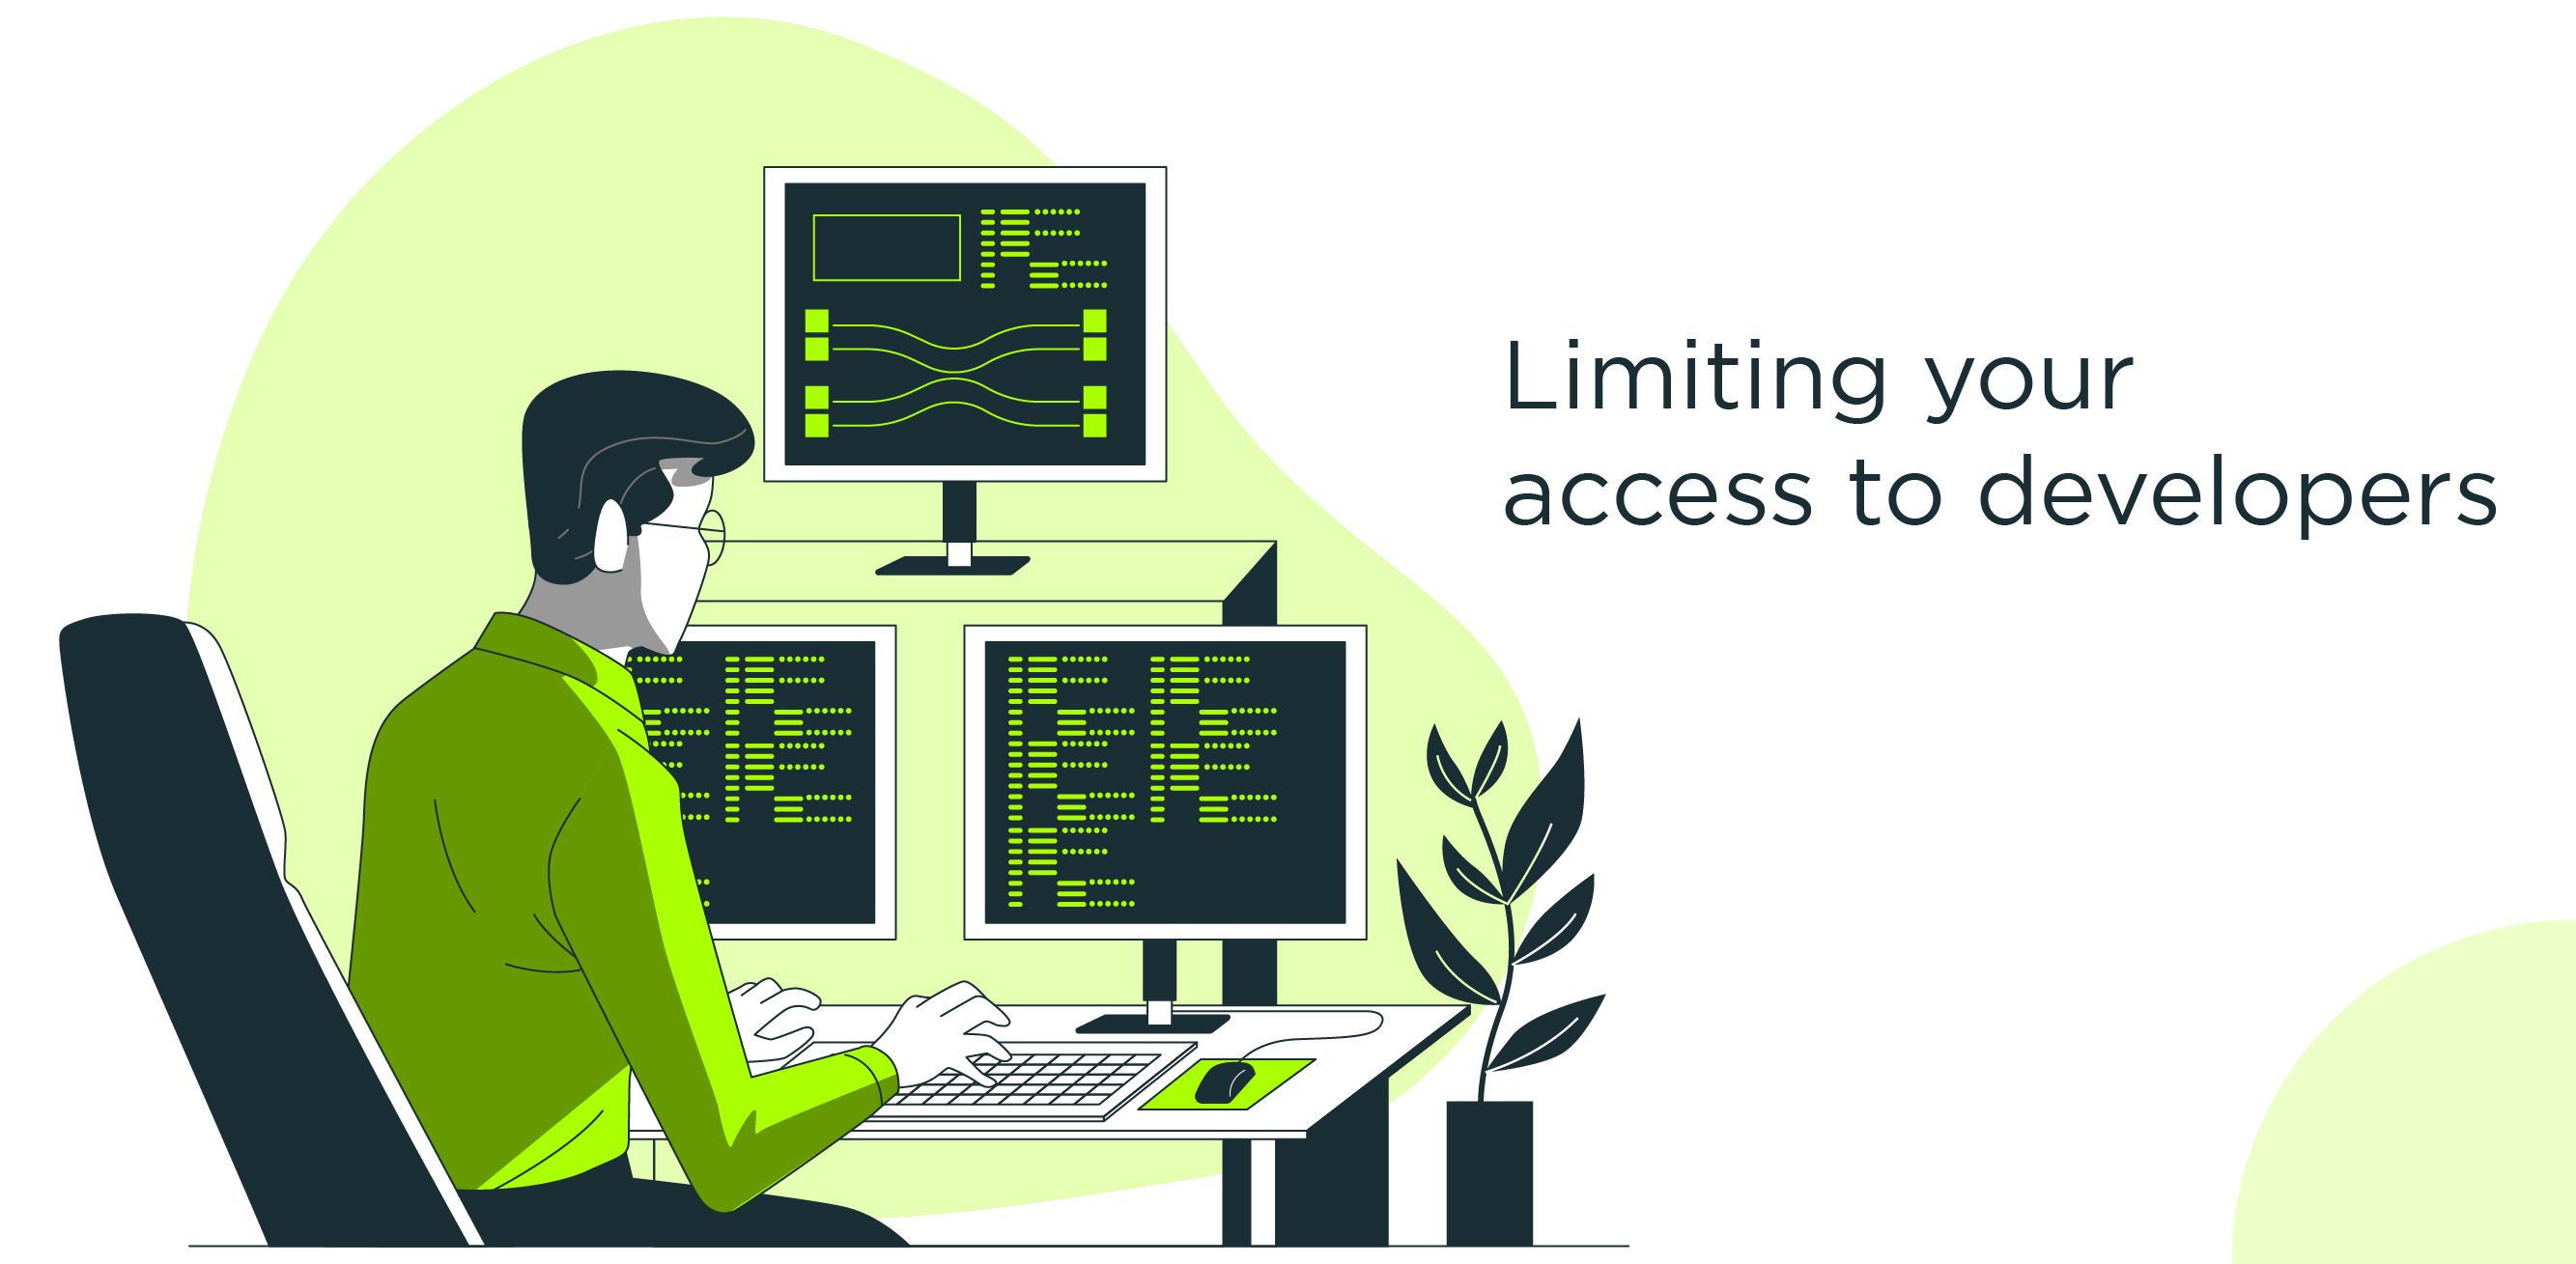 Limiting your access to developers